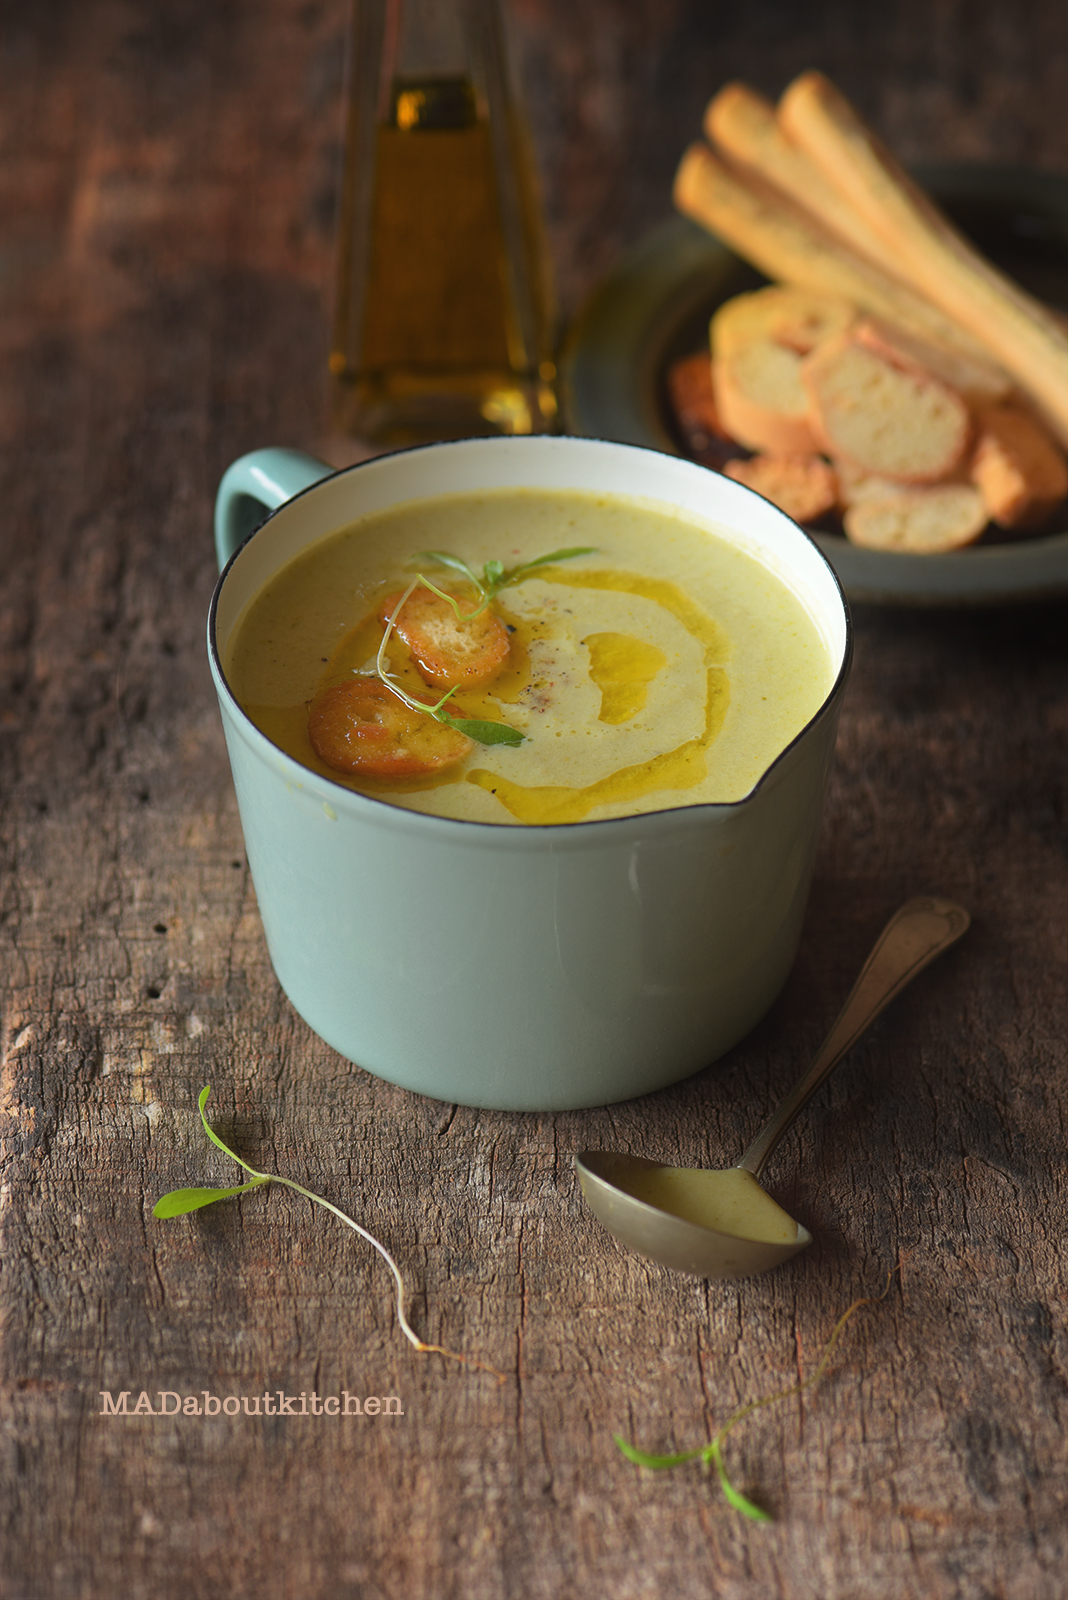 Broccoli Almond Soup is a quick, simple and easy recipe for a creamy, comforting soup with bursting flavours. Broccoli Almond Soup is a perfect for weeknights or for busy weekends. Serve it with freshly toasted garlic breads and it will taste divine. 